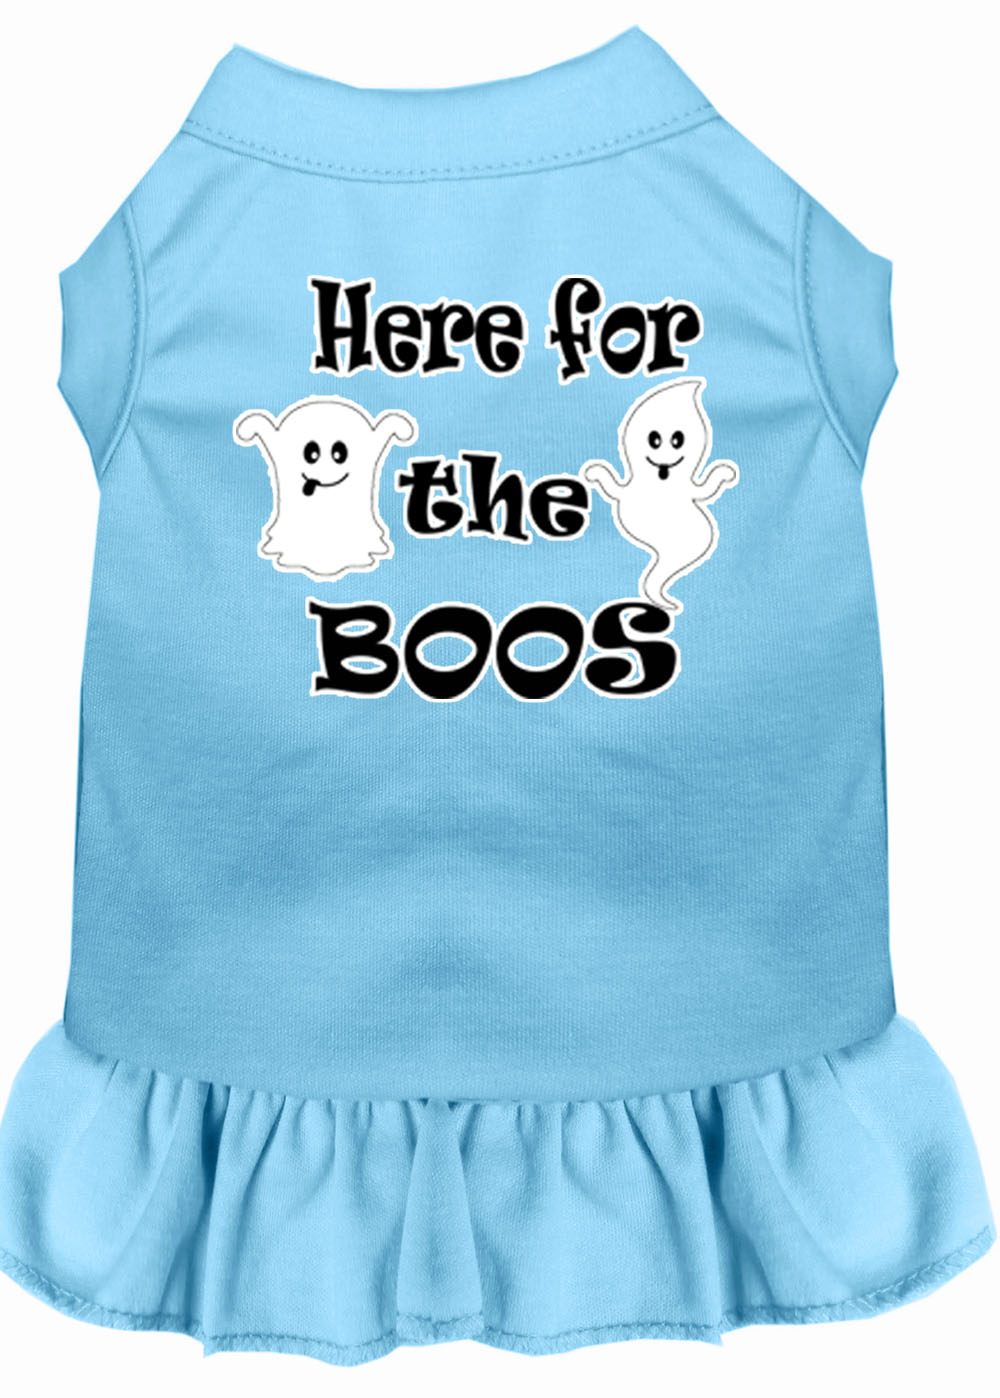 Here for the Boos Screen Print Dog Dress Baby Blue Lg